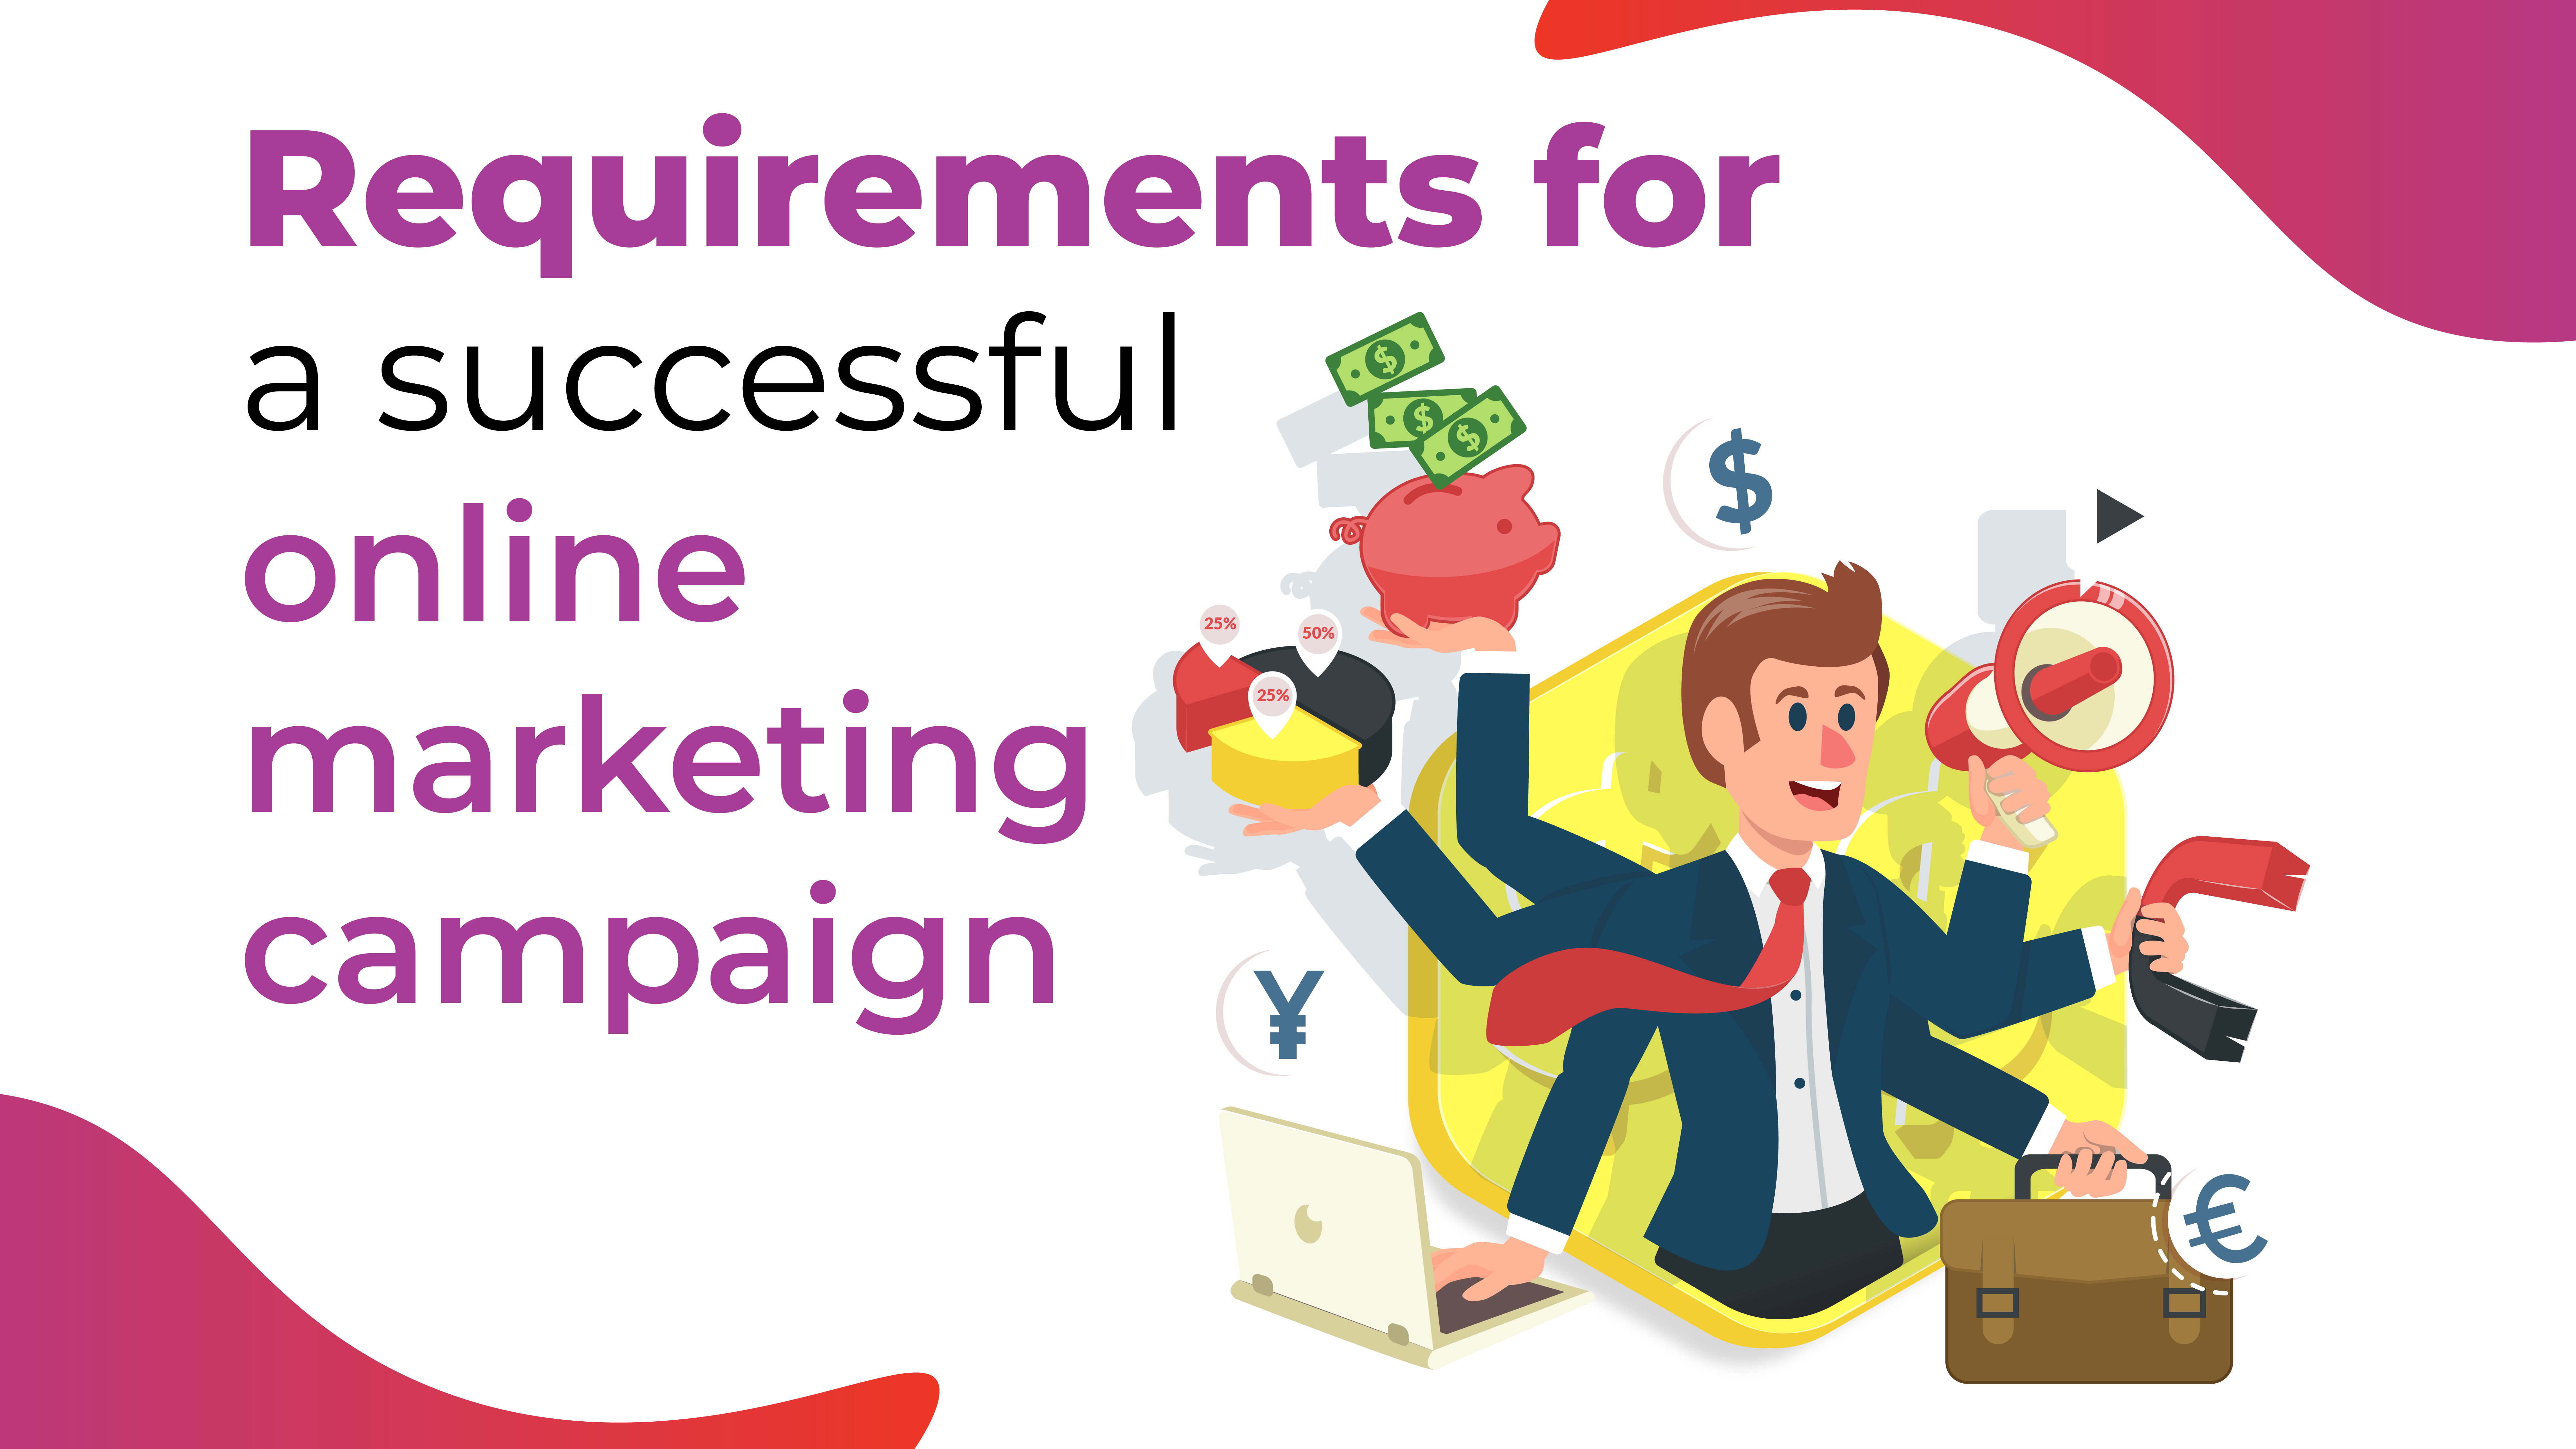 successful online marketing campaign requirements